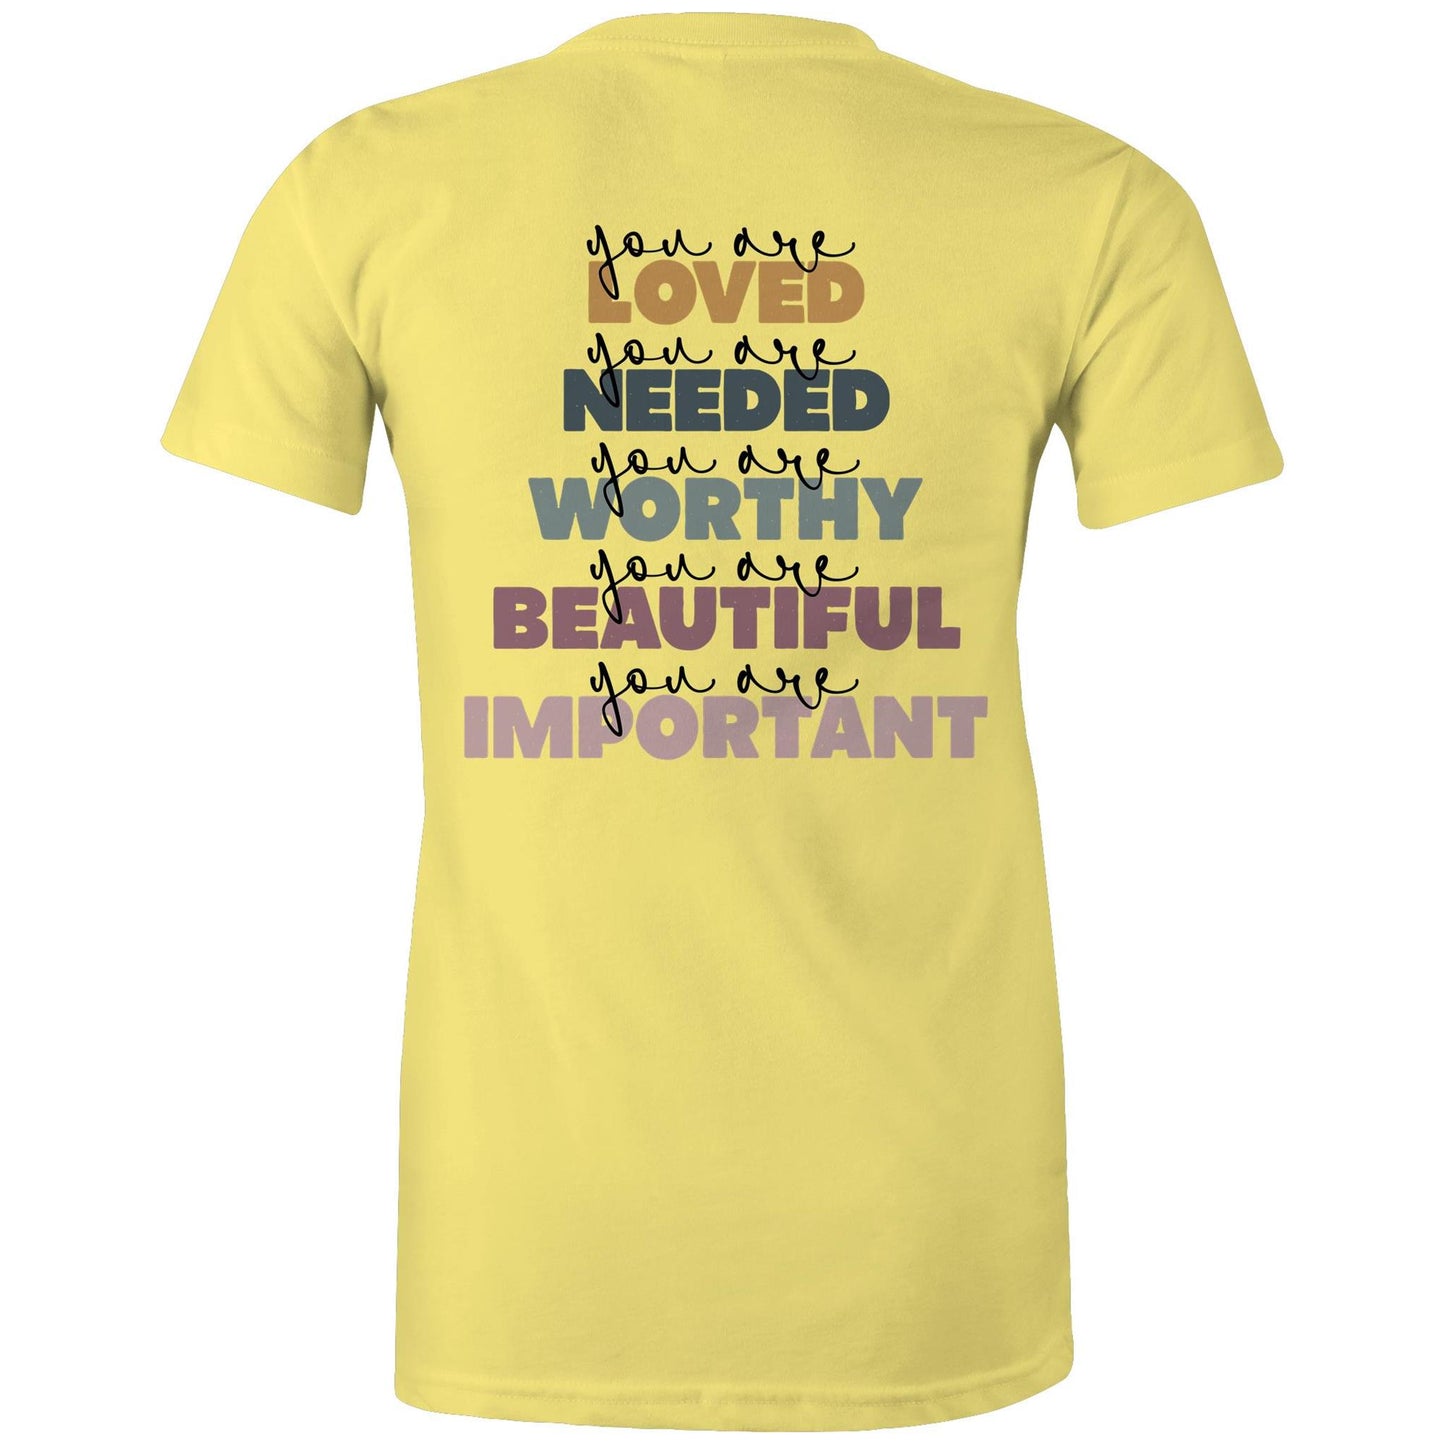 Womens Tee -  You are Worthy